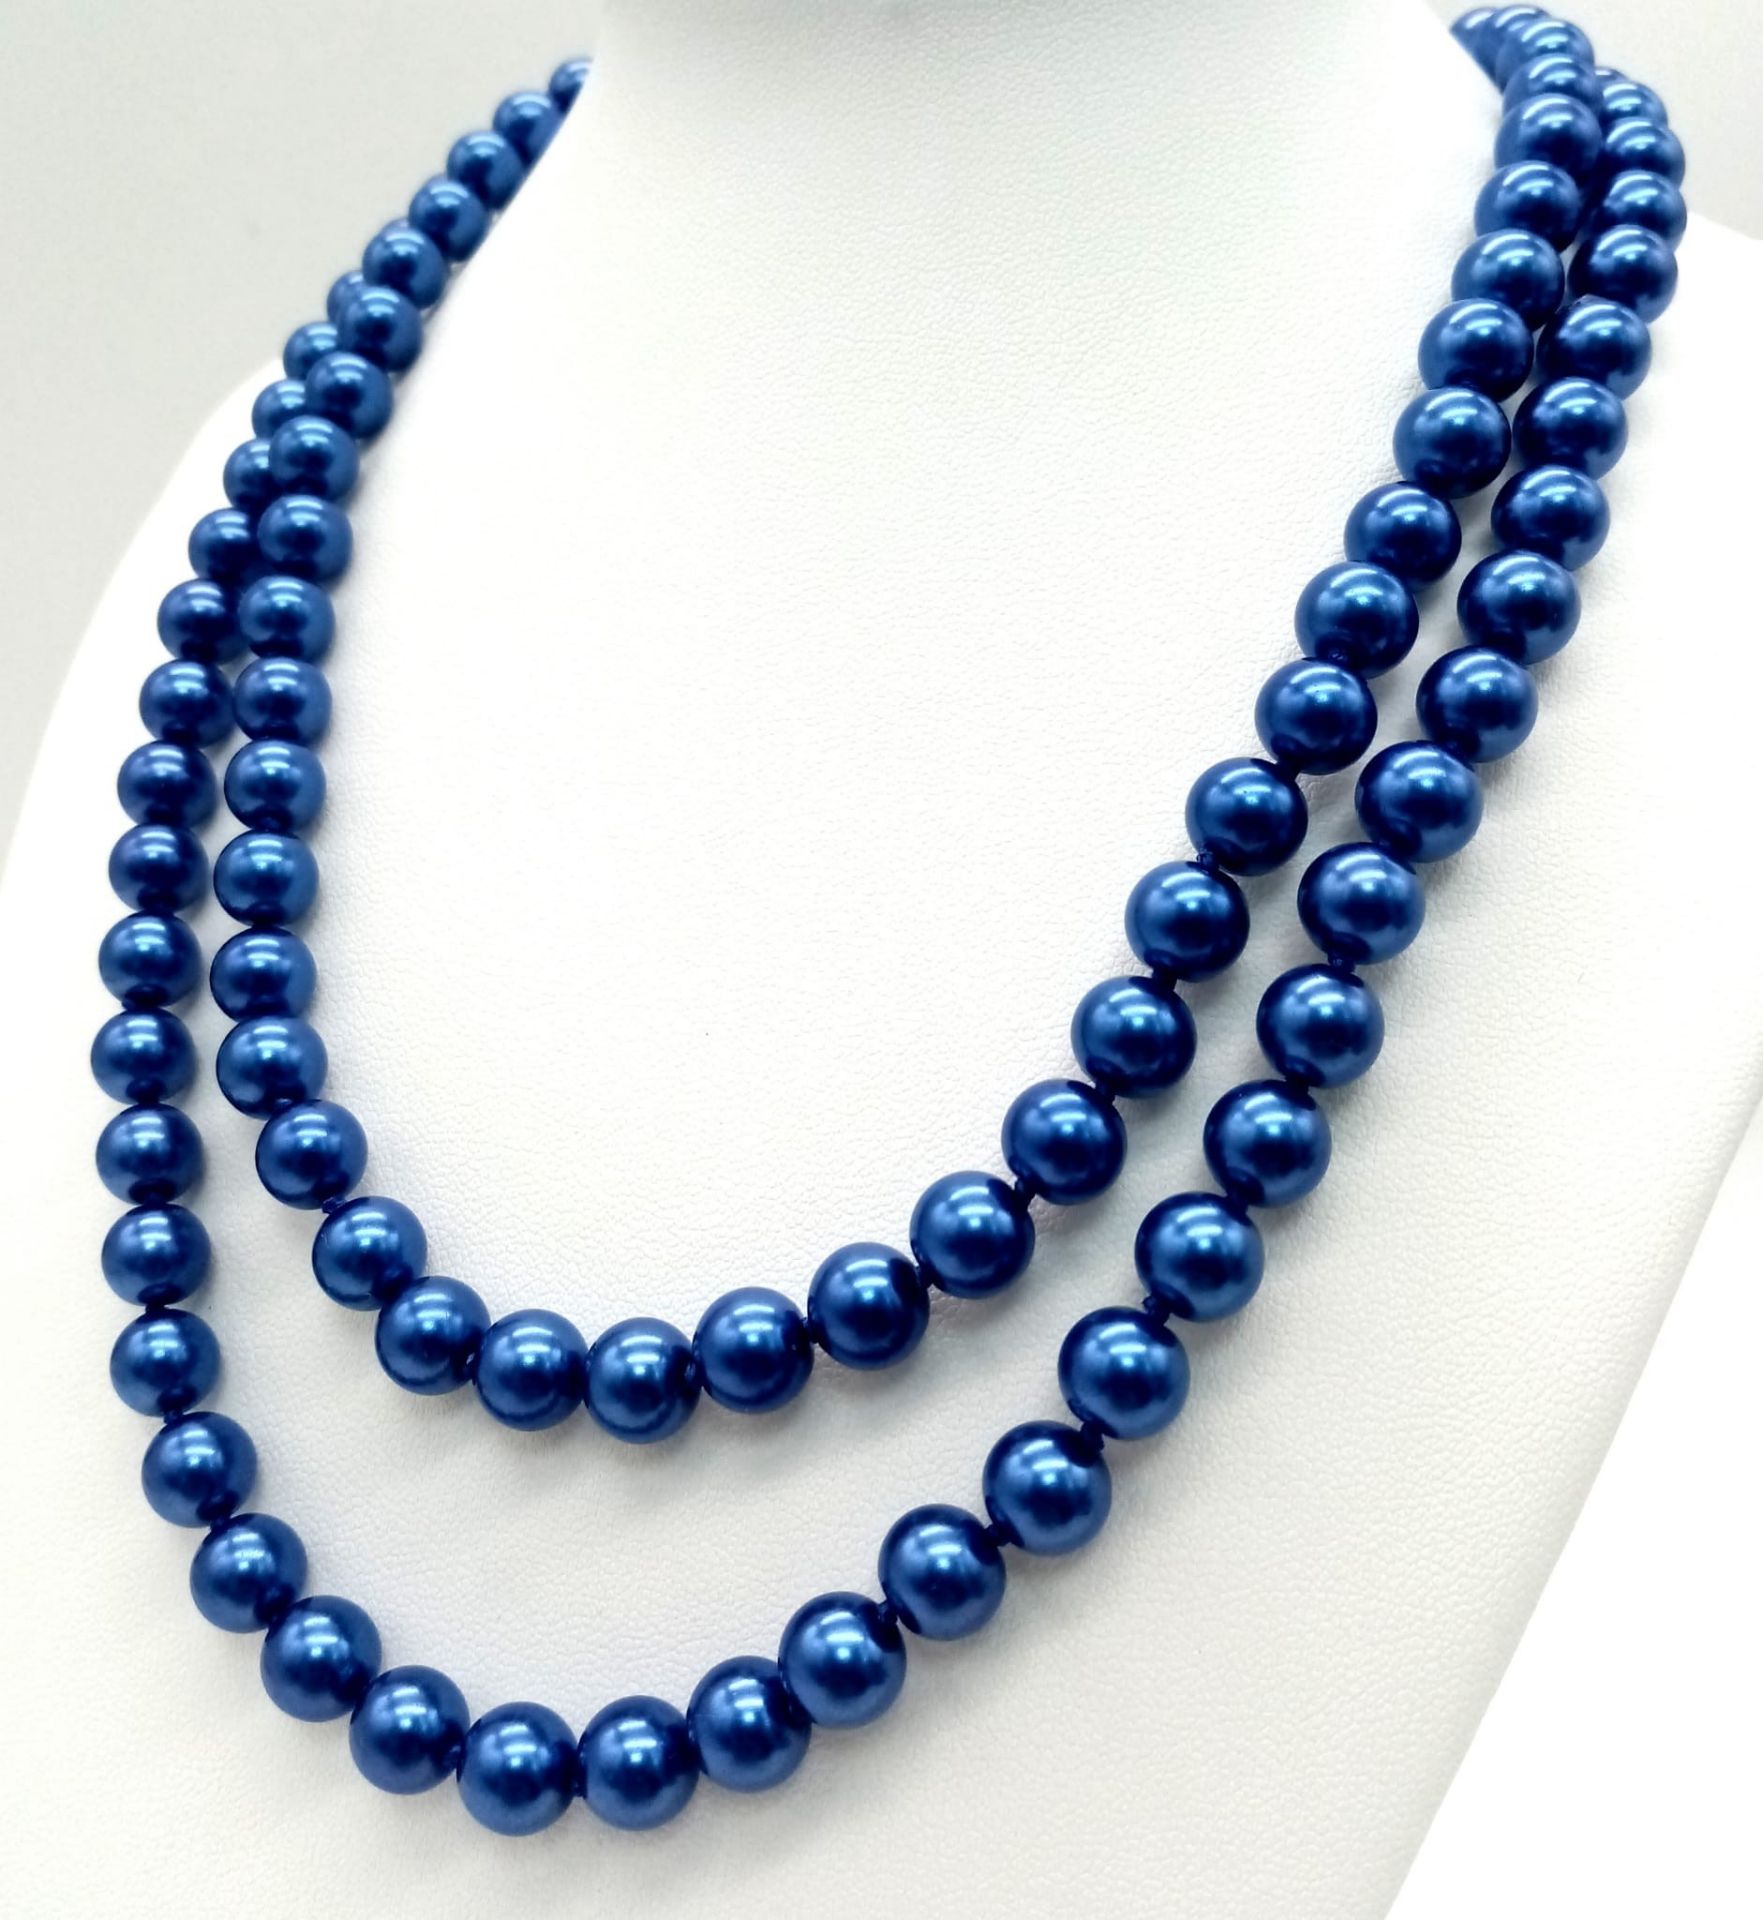 A Matinee Length Metallic Blue South Sea Pearl Shell Necklace. Beads - 8mm. Necklace length - 88cm. - Image 2 of 3